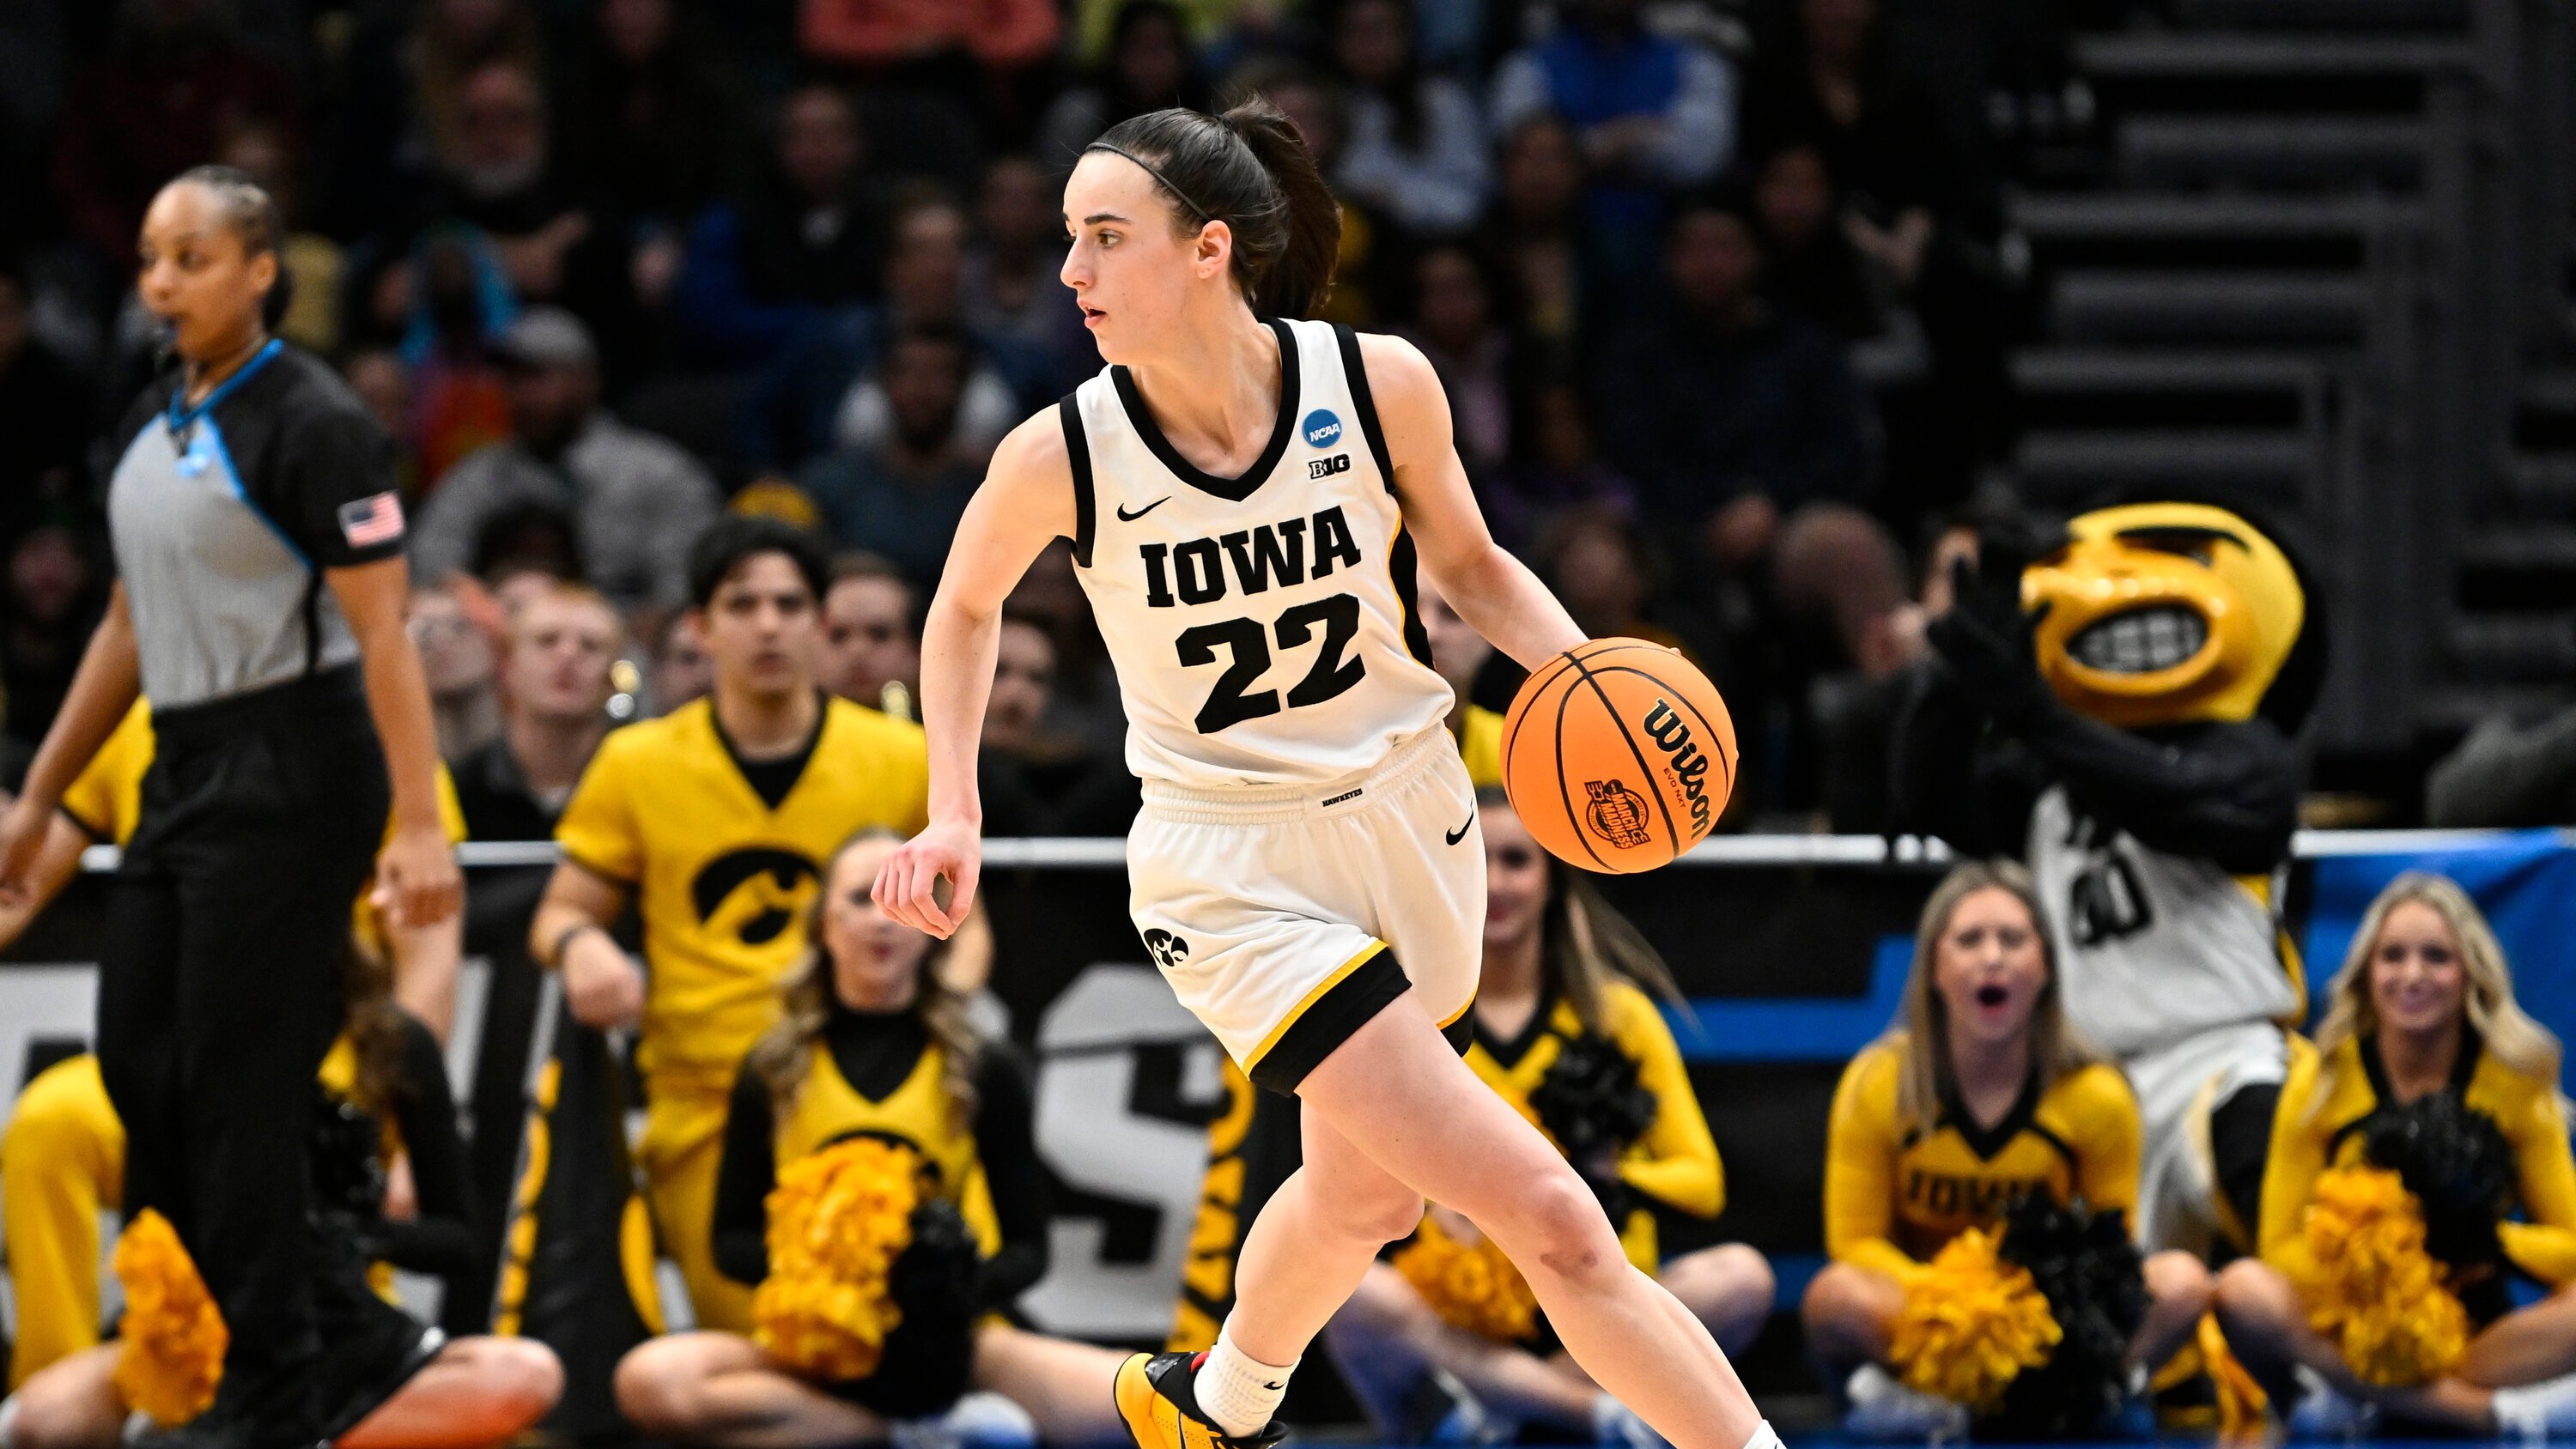 Caitlin Clark Leads Iowa to the Final Four, While L.S.U. Gets Past Its Cold Shooting